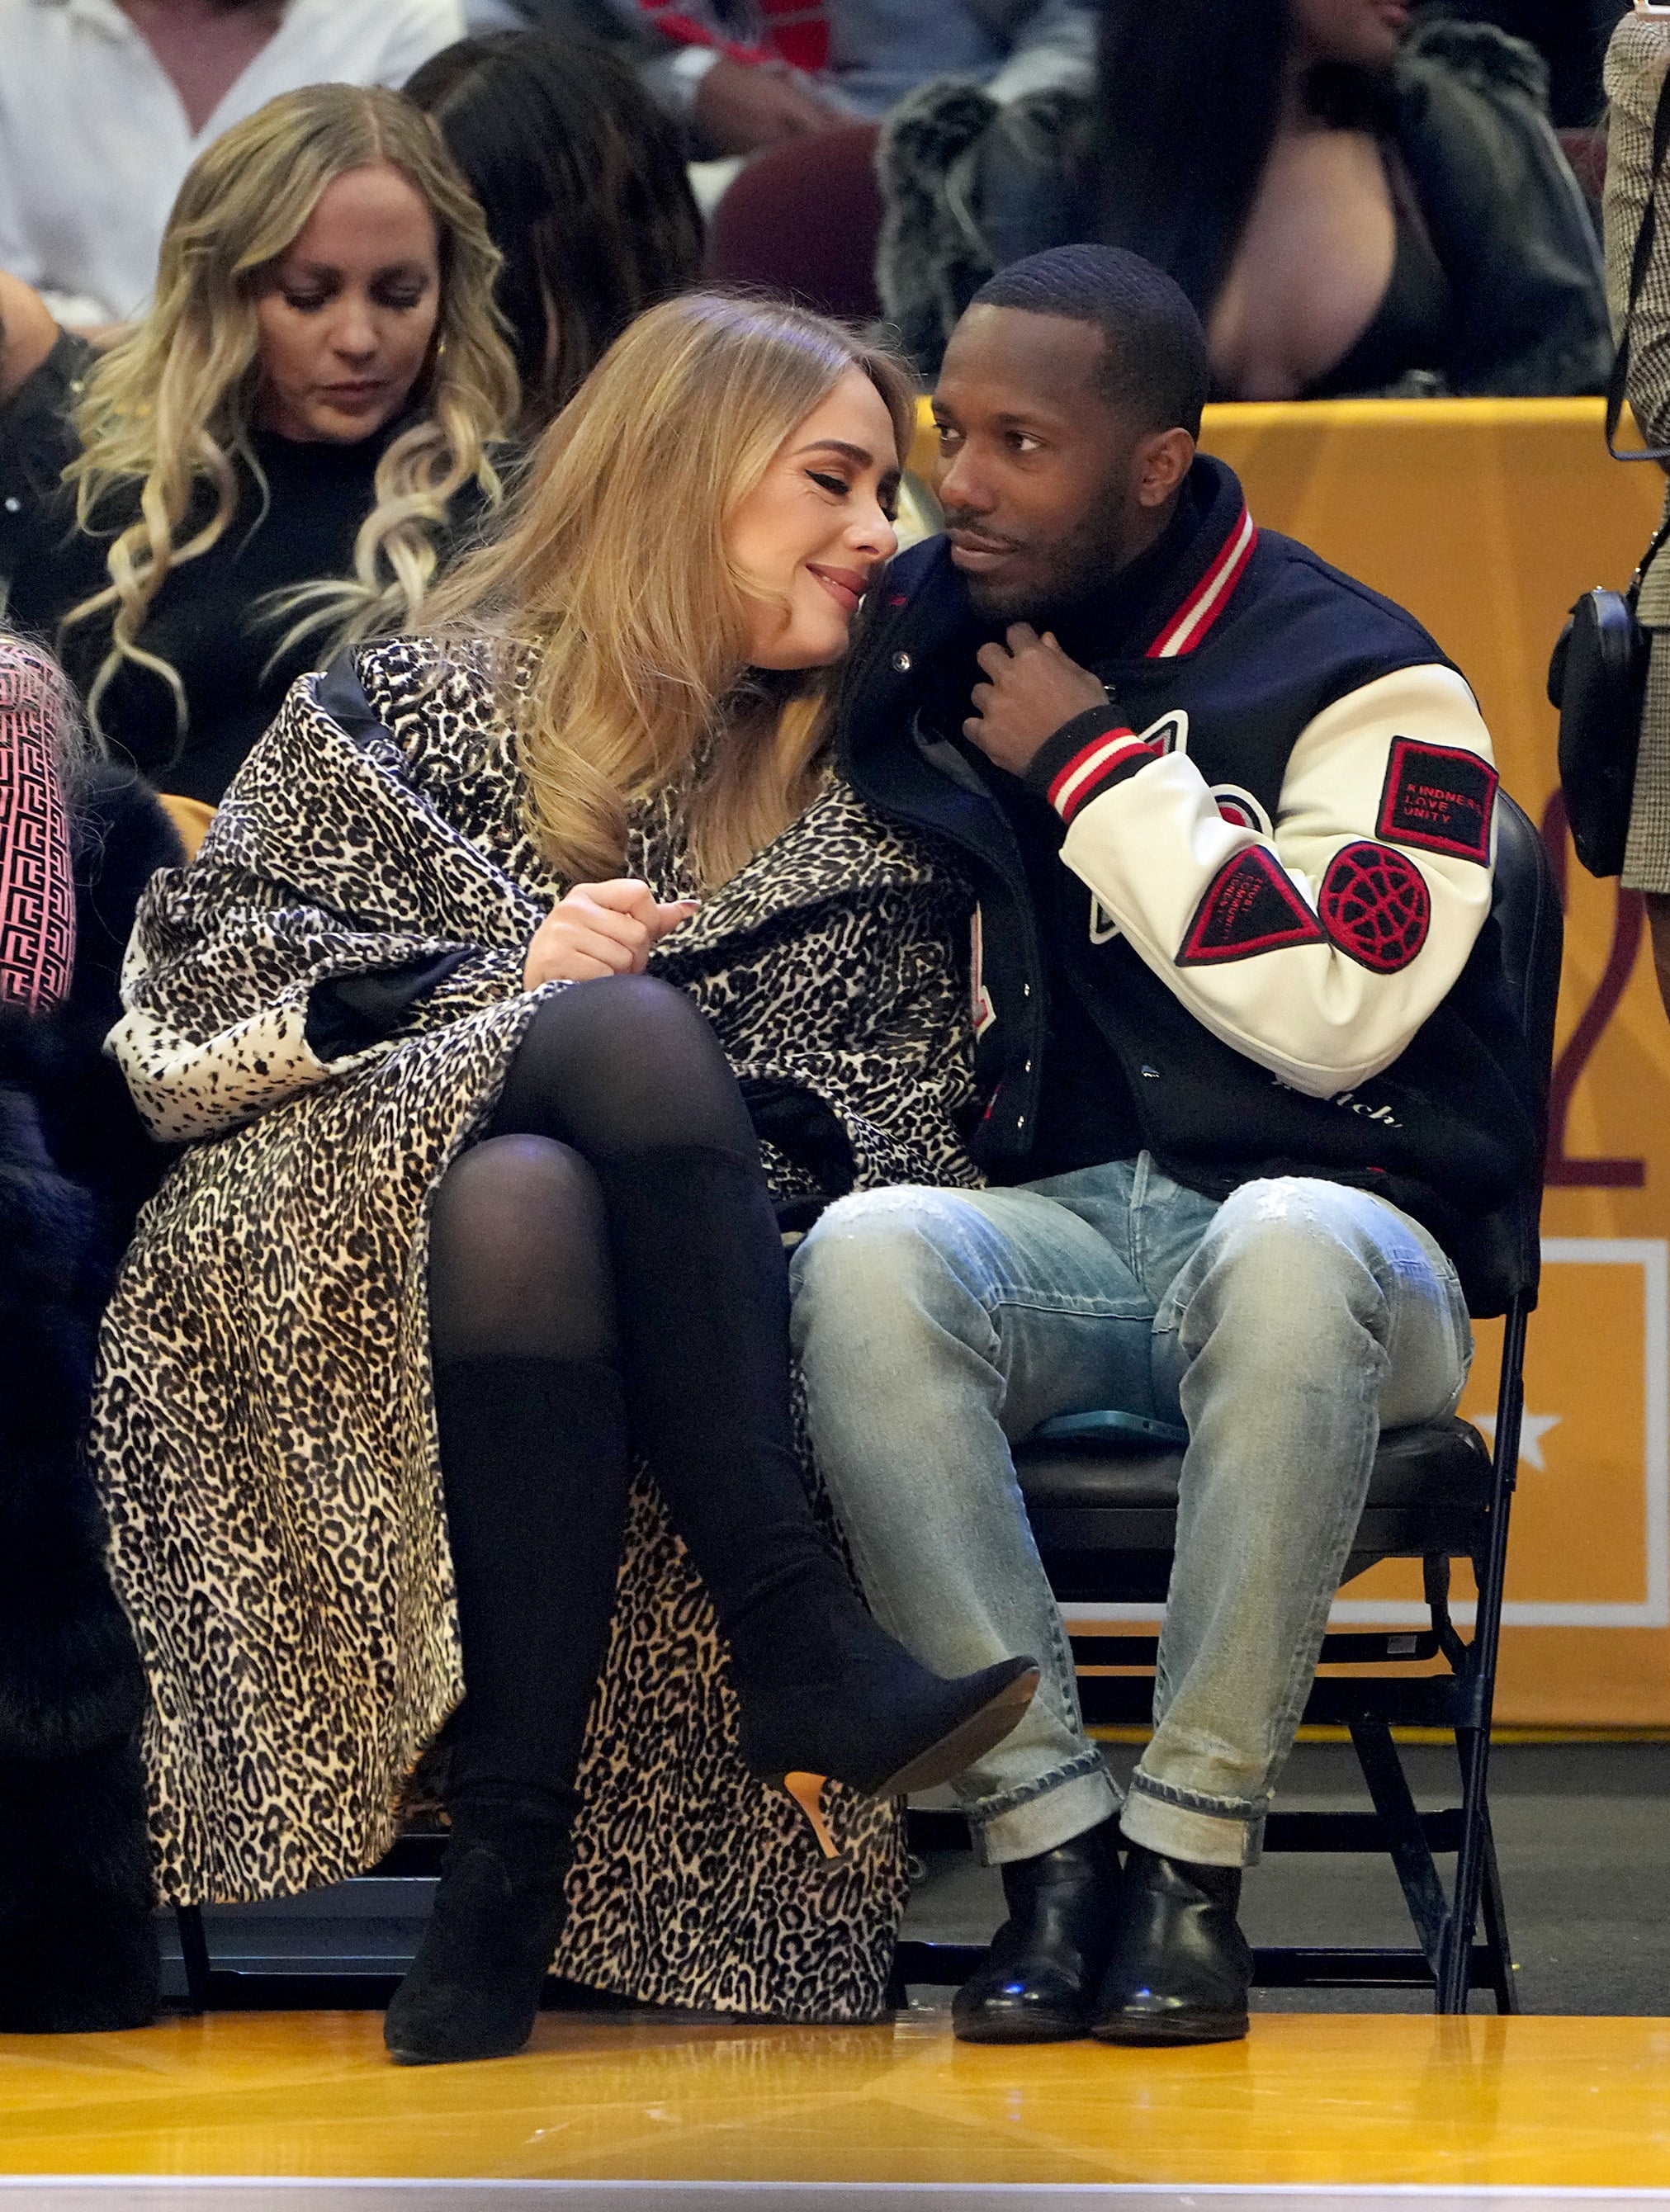 CLEVELAND, OHIO - FEBRUARY 20: (L-R) Adele and Rich Paul attend the 2022 NBA All-Star Game at Rocket Mortgage Fieldhouse on February 20, 2022 in Cleveland, Ohio. NOTE TO USER: User expressly acknowledges and agrees that, by downloading and or using this photograph, User is consenting to the terms and conditions of the Getty Images License Agreement.  (Photo by Kevin Mazur/Getty Images)